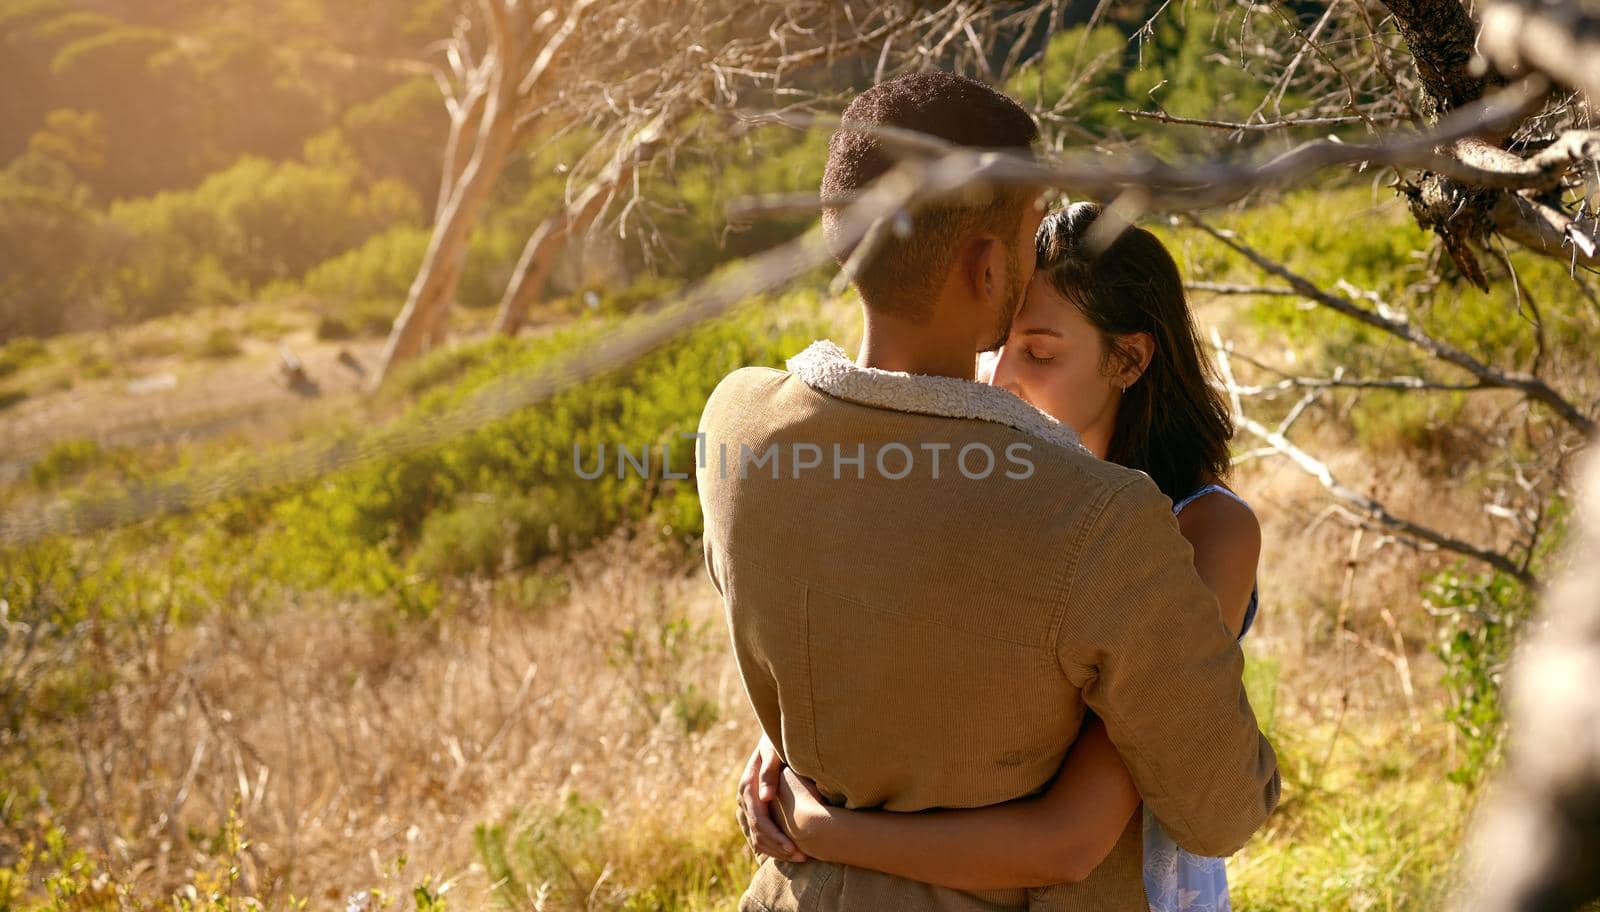 All we need is love. a young couple embracing one another on a date outside in nature